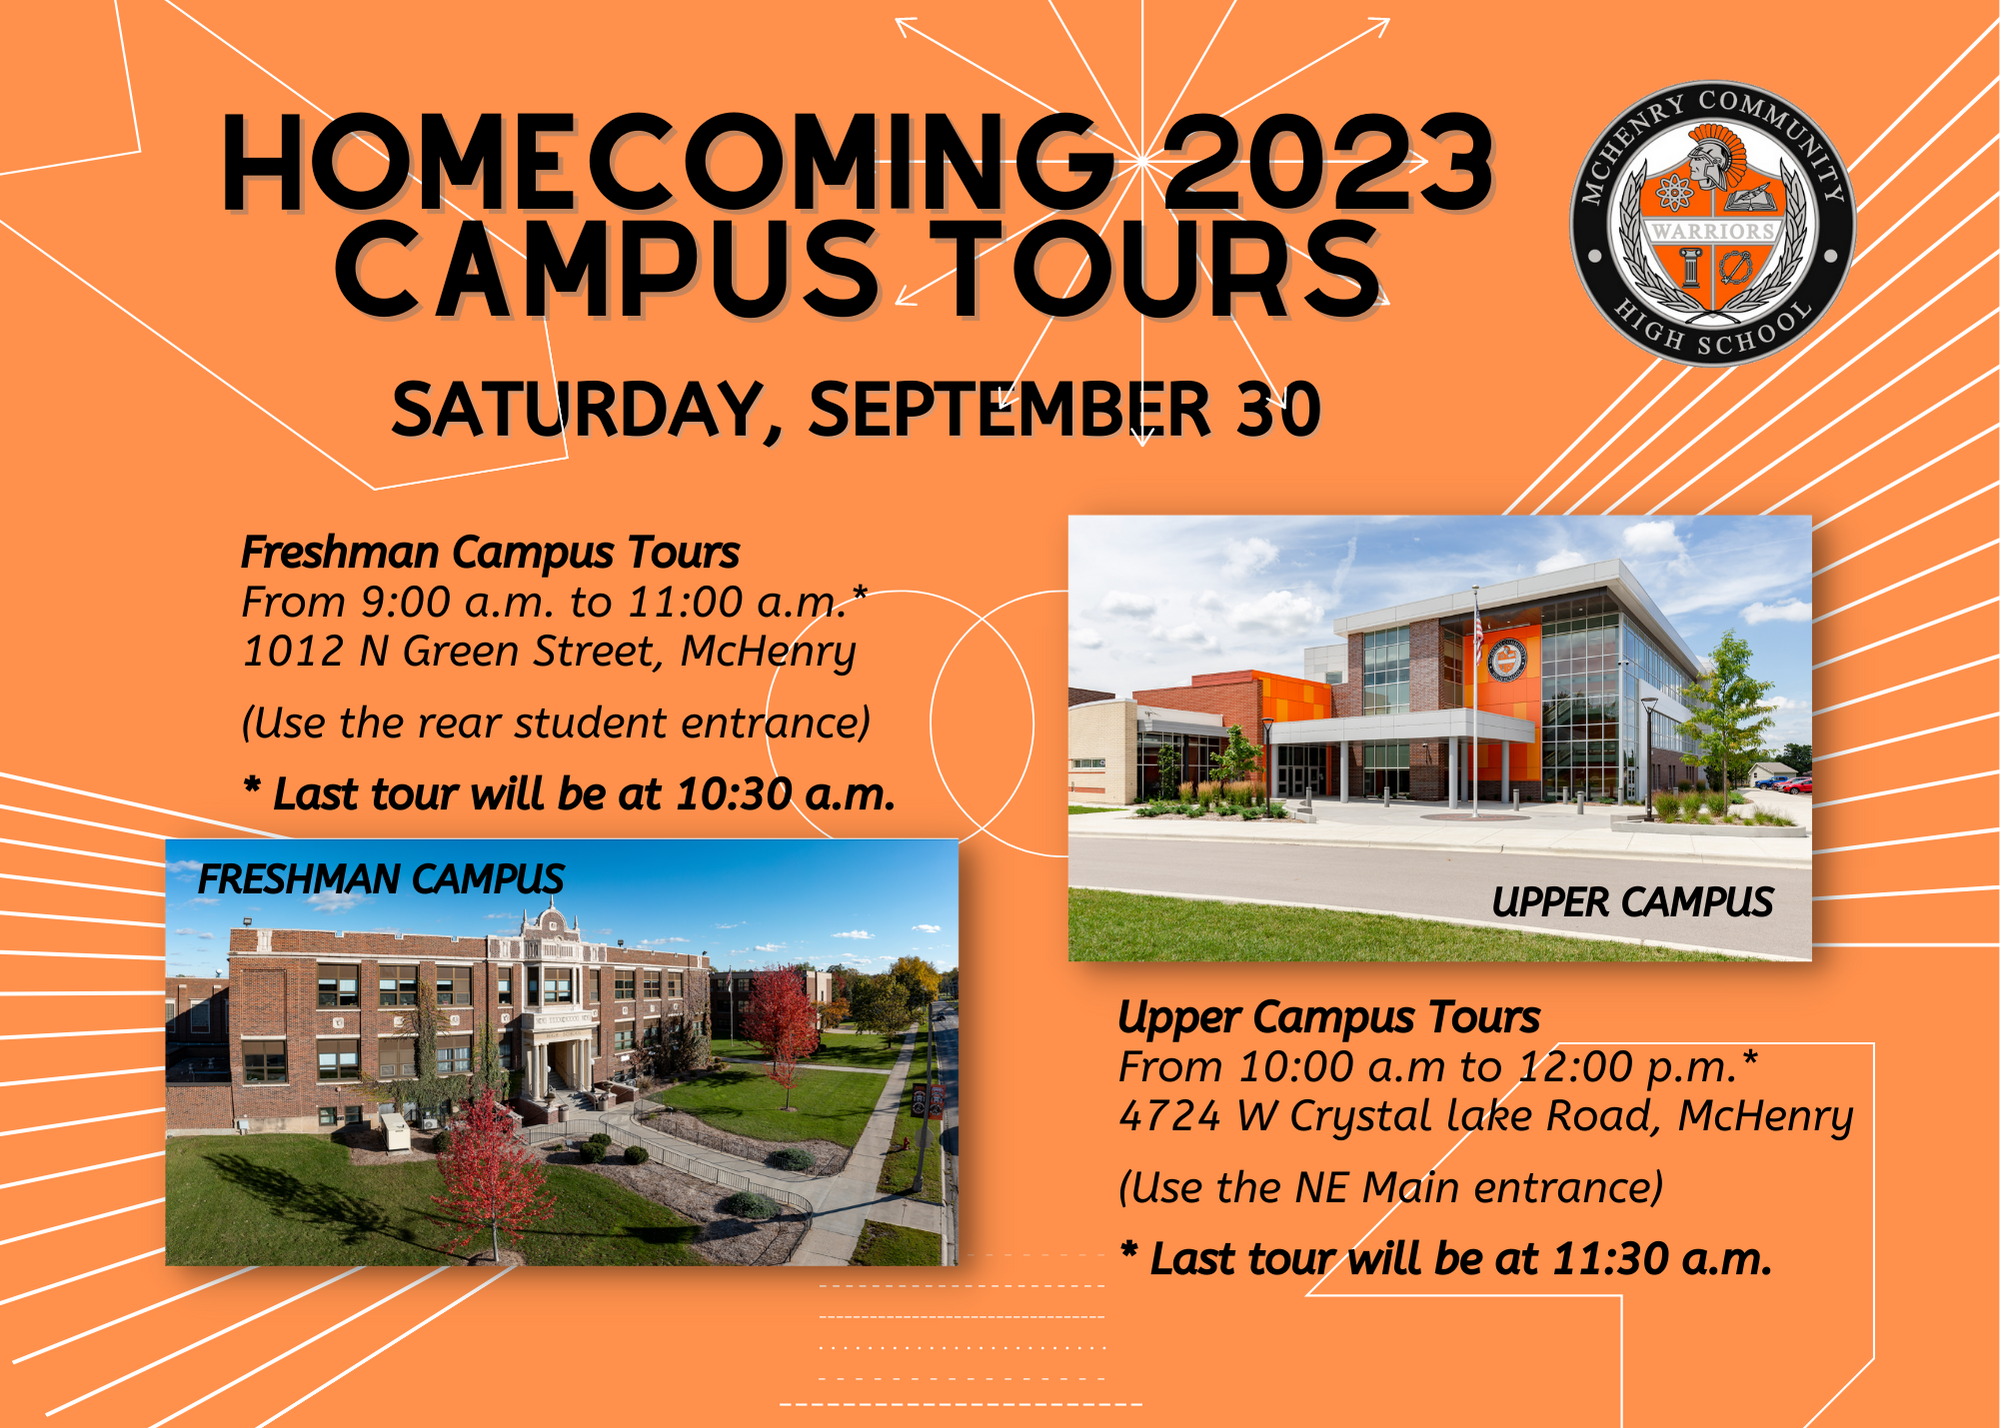 Homecoming 2023 Campus Tours Saturday, September 30 Freshman Campus Tours From 9:00 am to 11am 1012 N Green Street, McHenry Use the rear student entrance. Last tour will be at 10:30 a.m. Upper Campus Tours from 10:00 a.m. to 12:00 p.m. 4724 W Crystal Lake Road, McHenry Us the NE main entrance. Last tour will be at 11:30